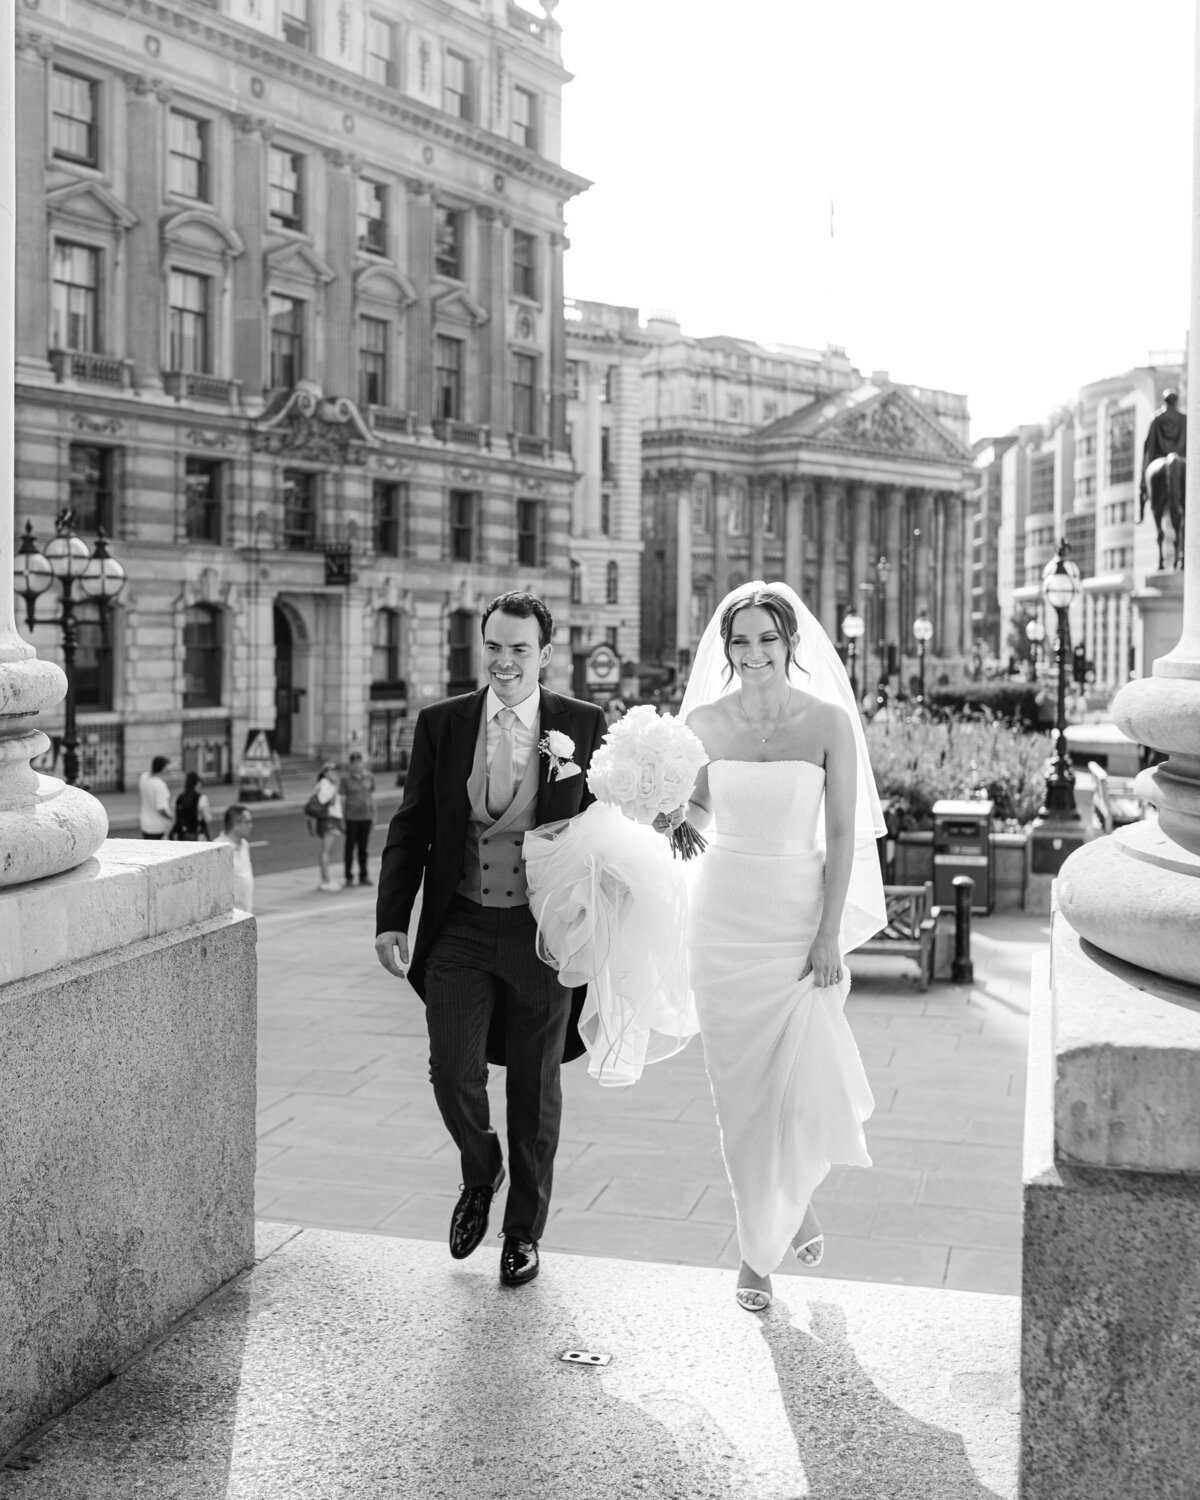 Bride and groom arriving for wedding reception at The Royal Exchange